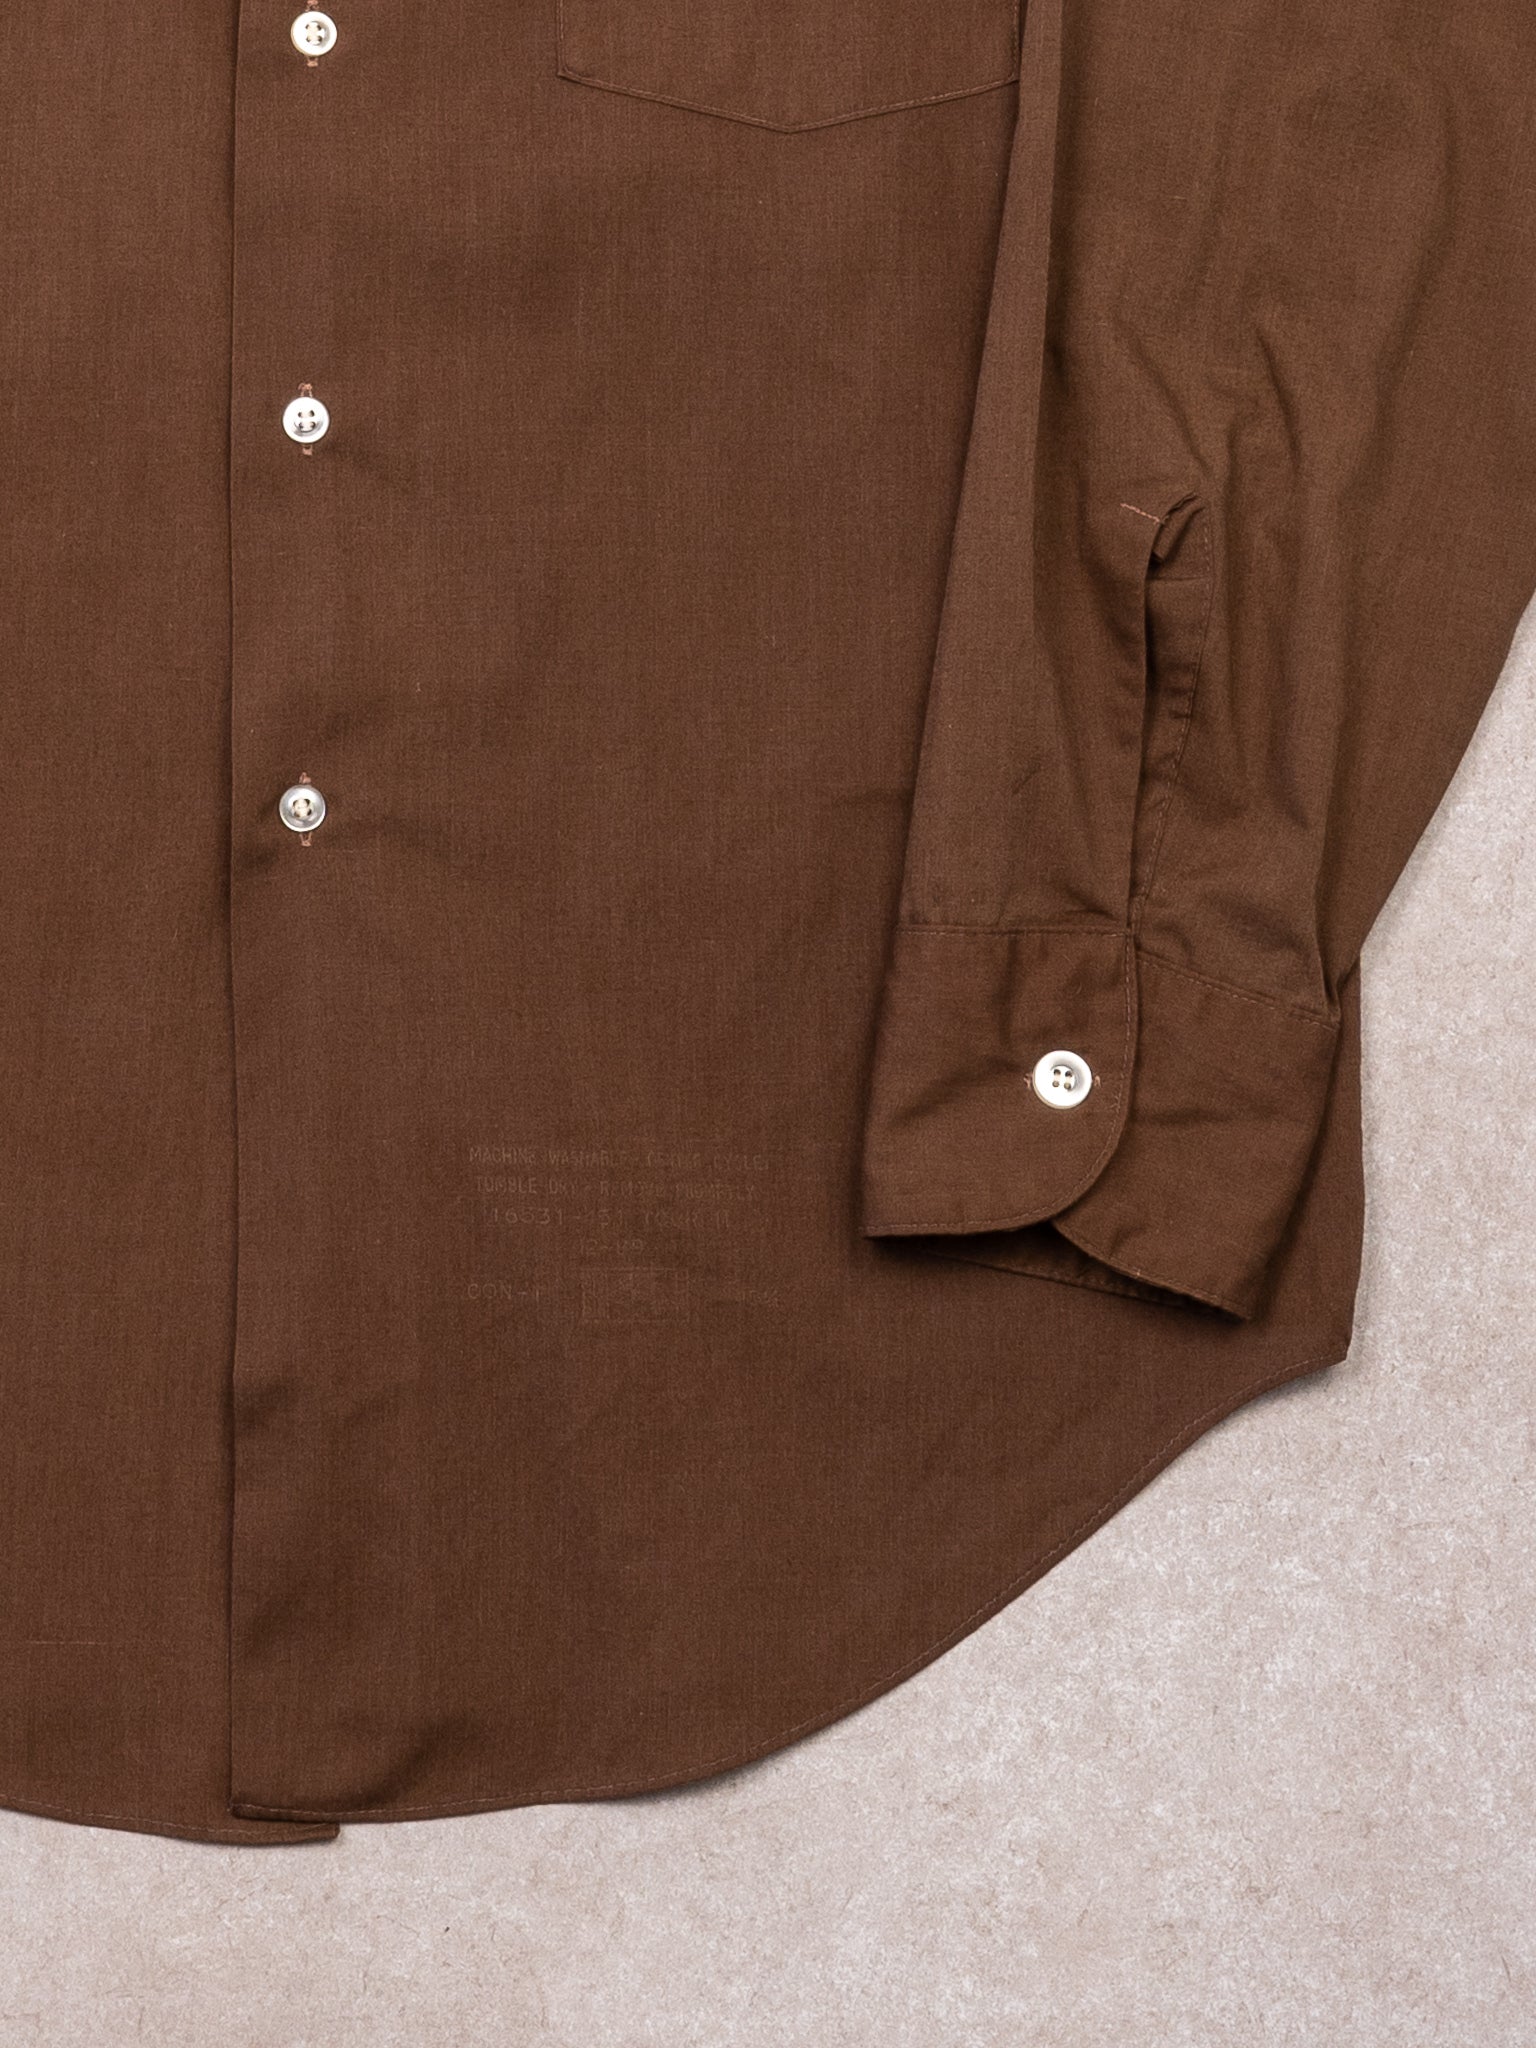 Vintage 70s Brown Arrow Long Sleeve Button Up (M)